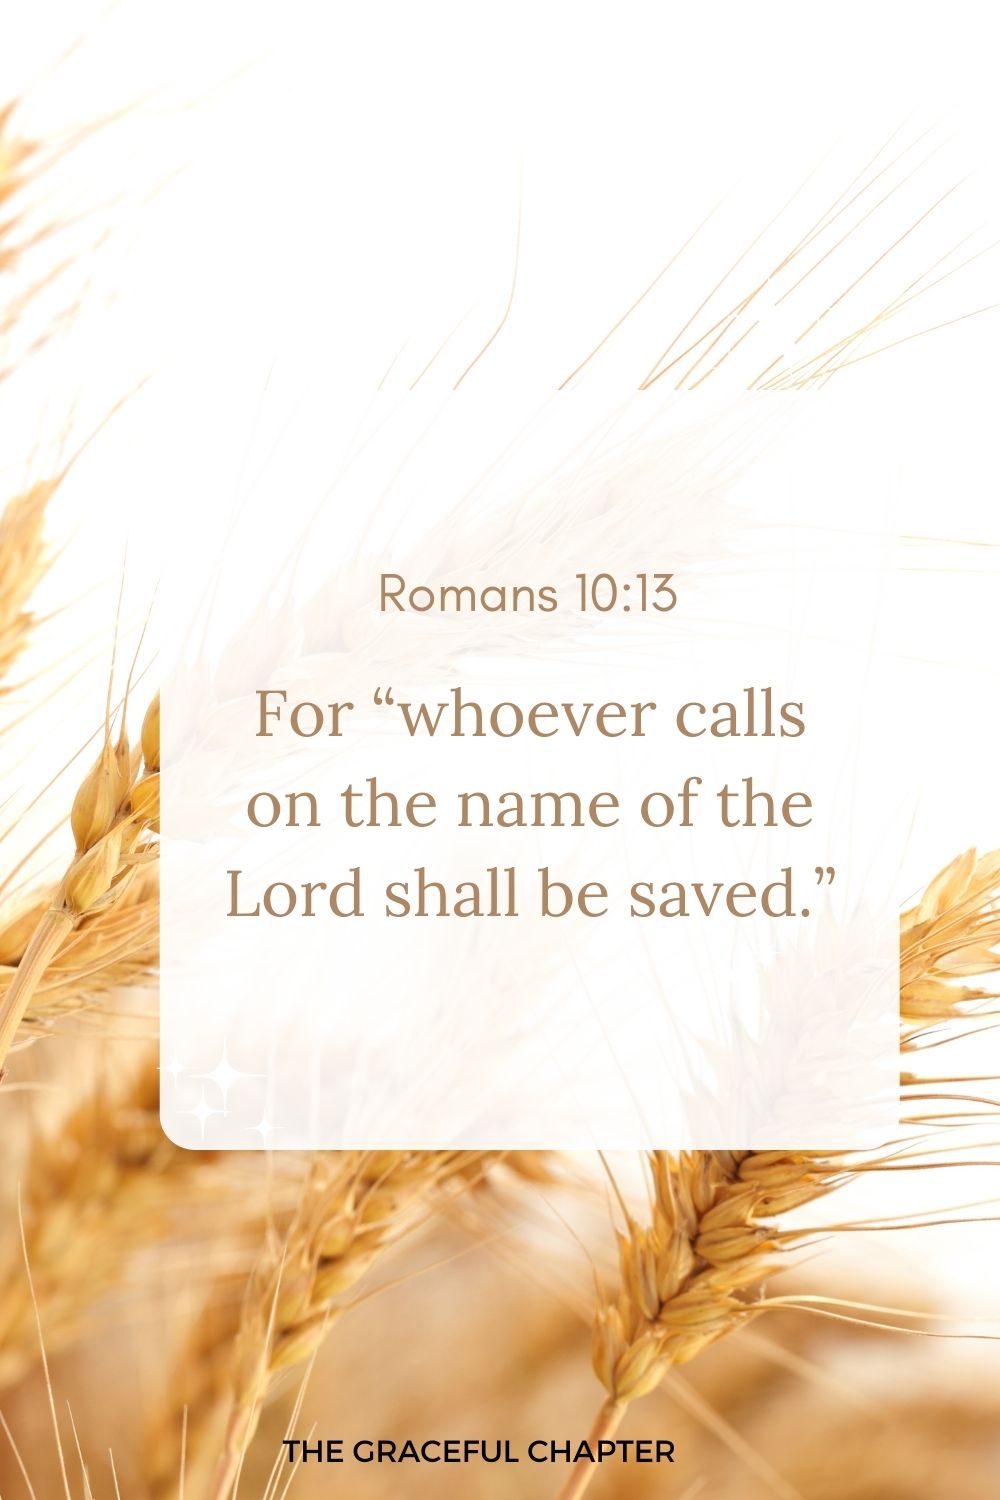 For “whoever calls on the name of the Lord shall be saved.” Romans 10:13